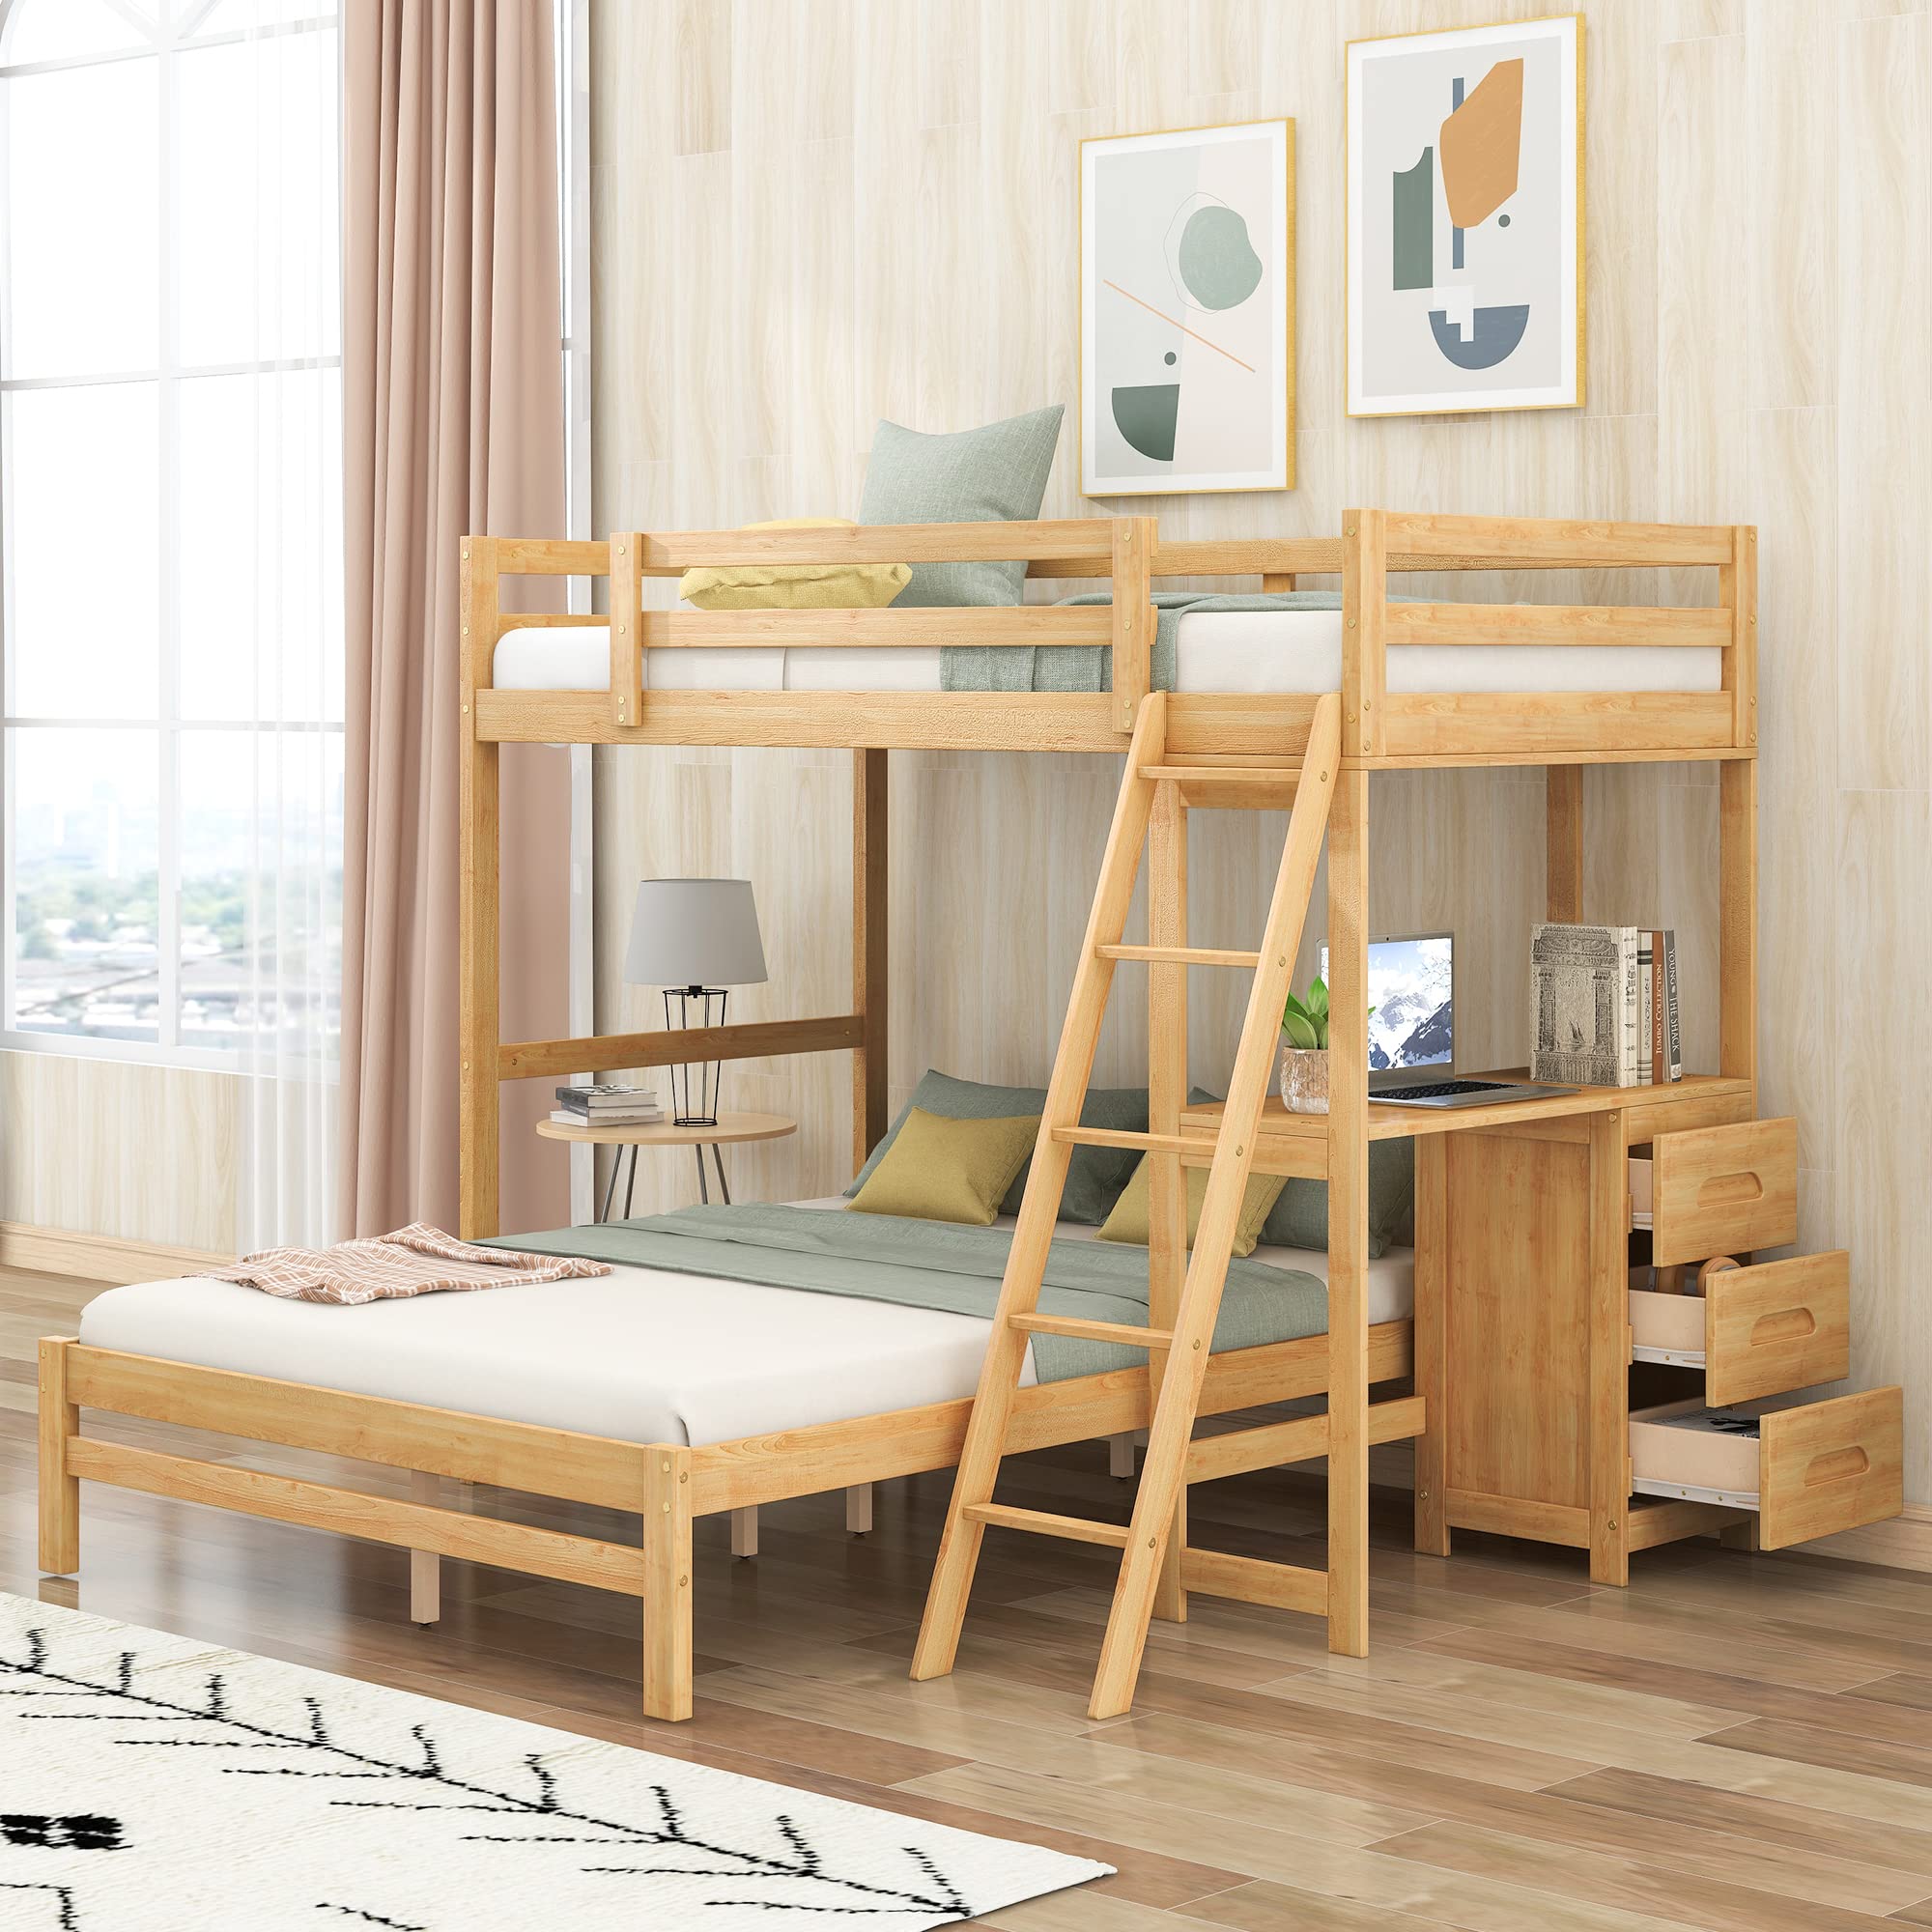 P PURLOVE Twin Over Full Bunk Bed with Desk and 3 Drawers Wood Bunk Bed with Ladder, Bunk Bed Frame can Be Split Into 2 Separate